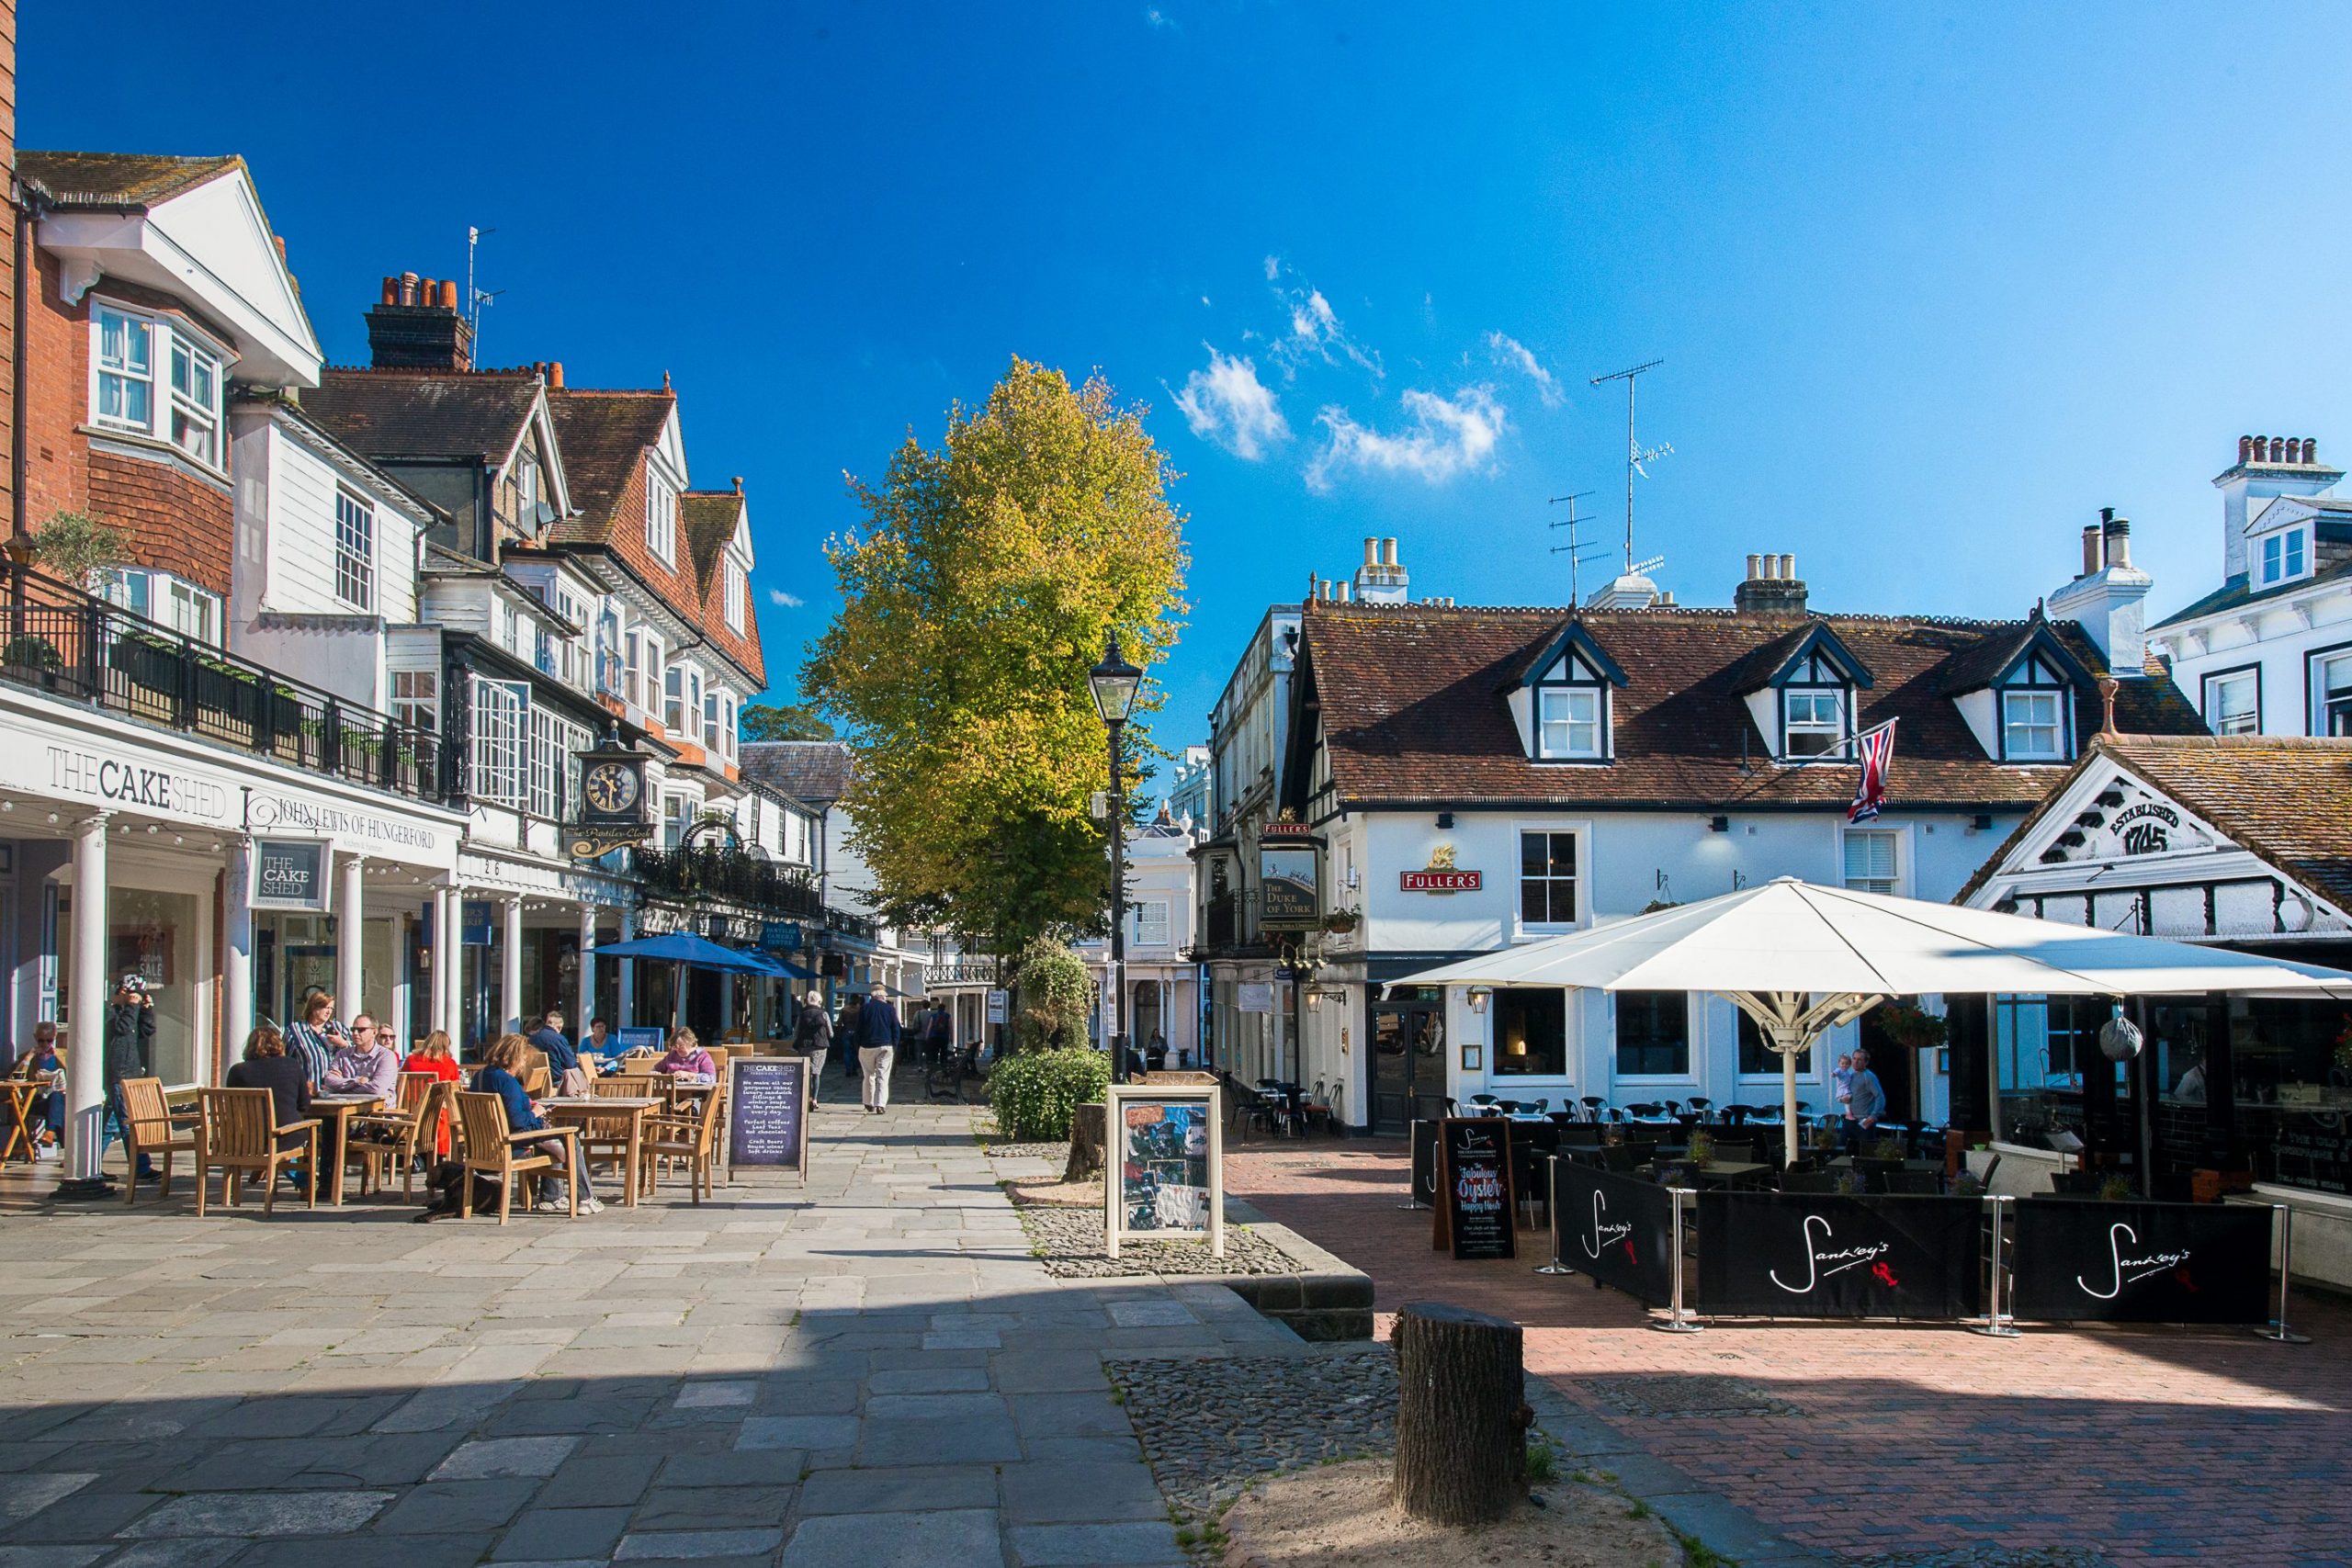 Photo of high street in Kent